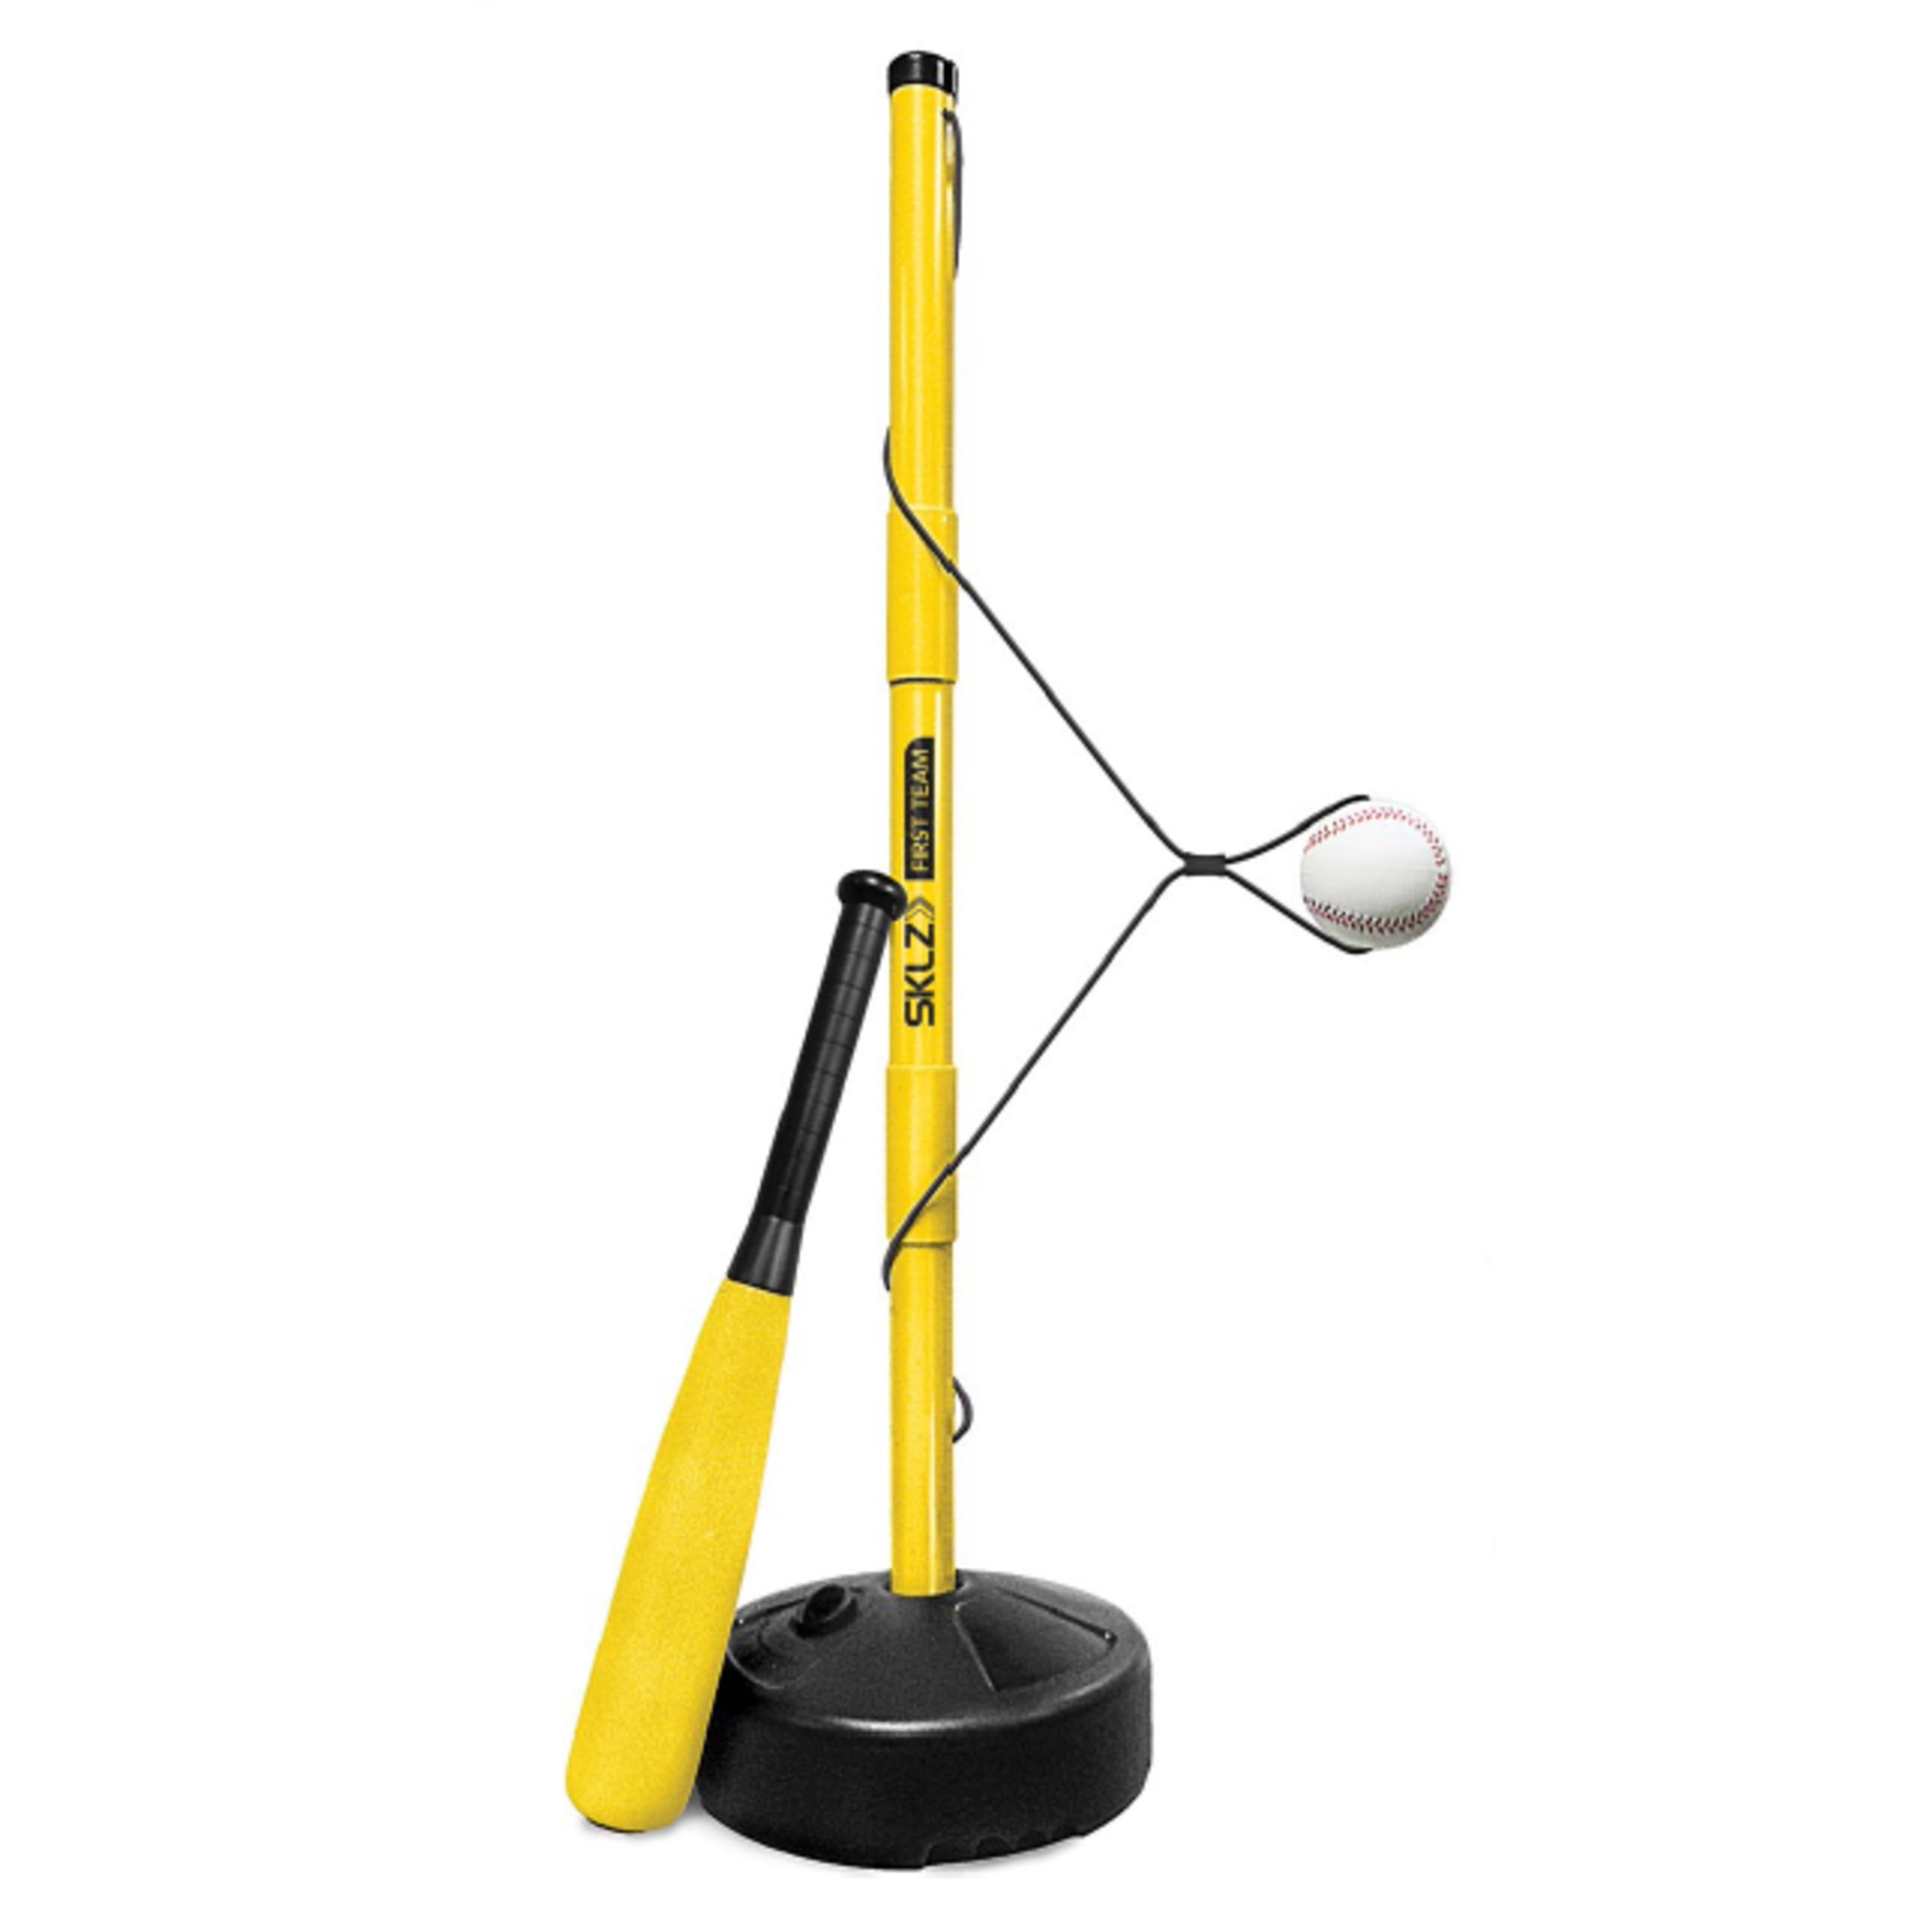 SKLZ Hit-a-way Batting Swing Trainer for Baseball and Softball for sale online 